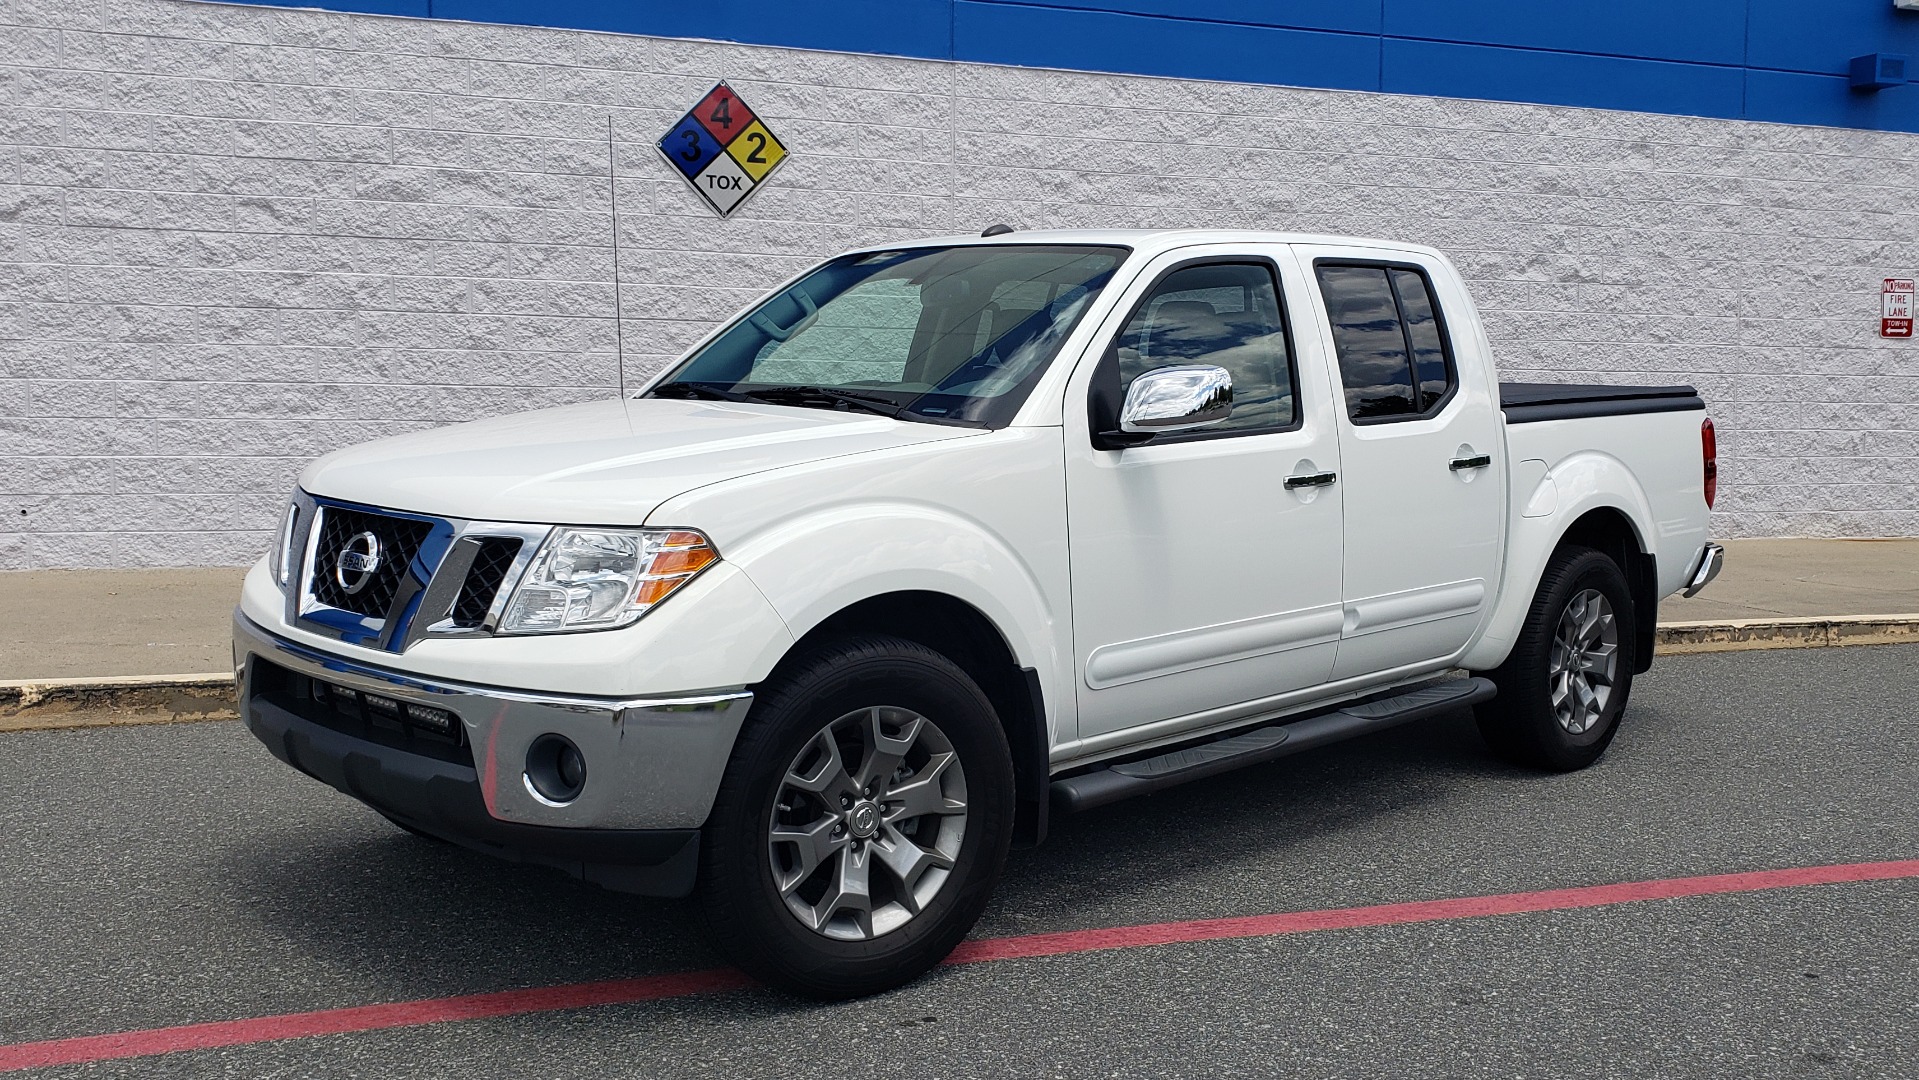 Used 2019 Nissan FRONTIER SL CREW CAB / 4X4 / NAV / SUNROOF / ROCKFORD FOSGATE / LOADED for sale Sold at Formula Imports in Charlotte NC 28227 1